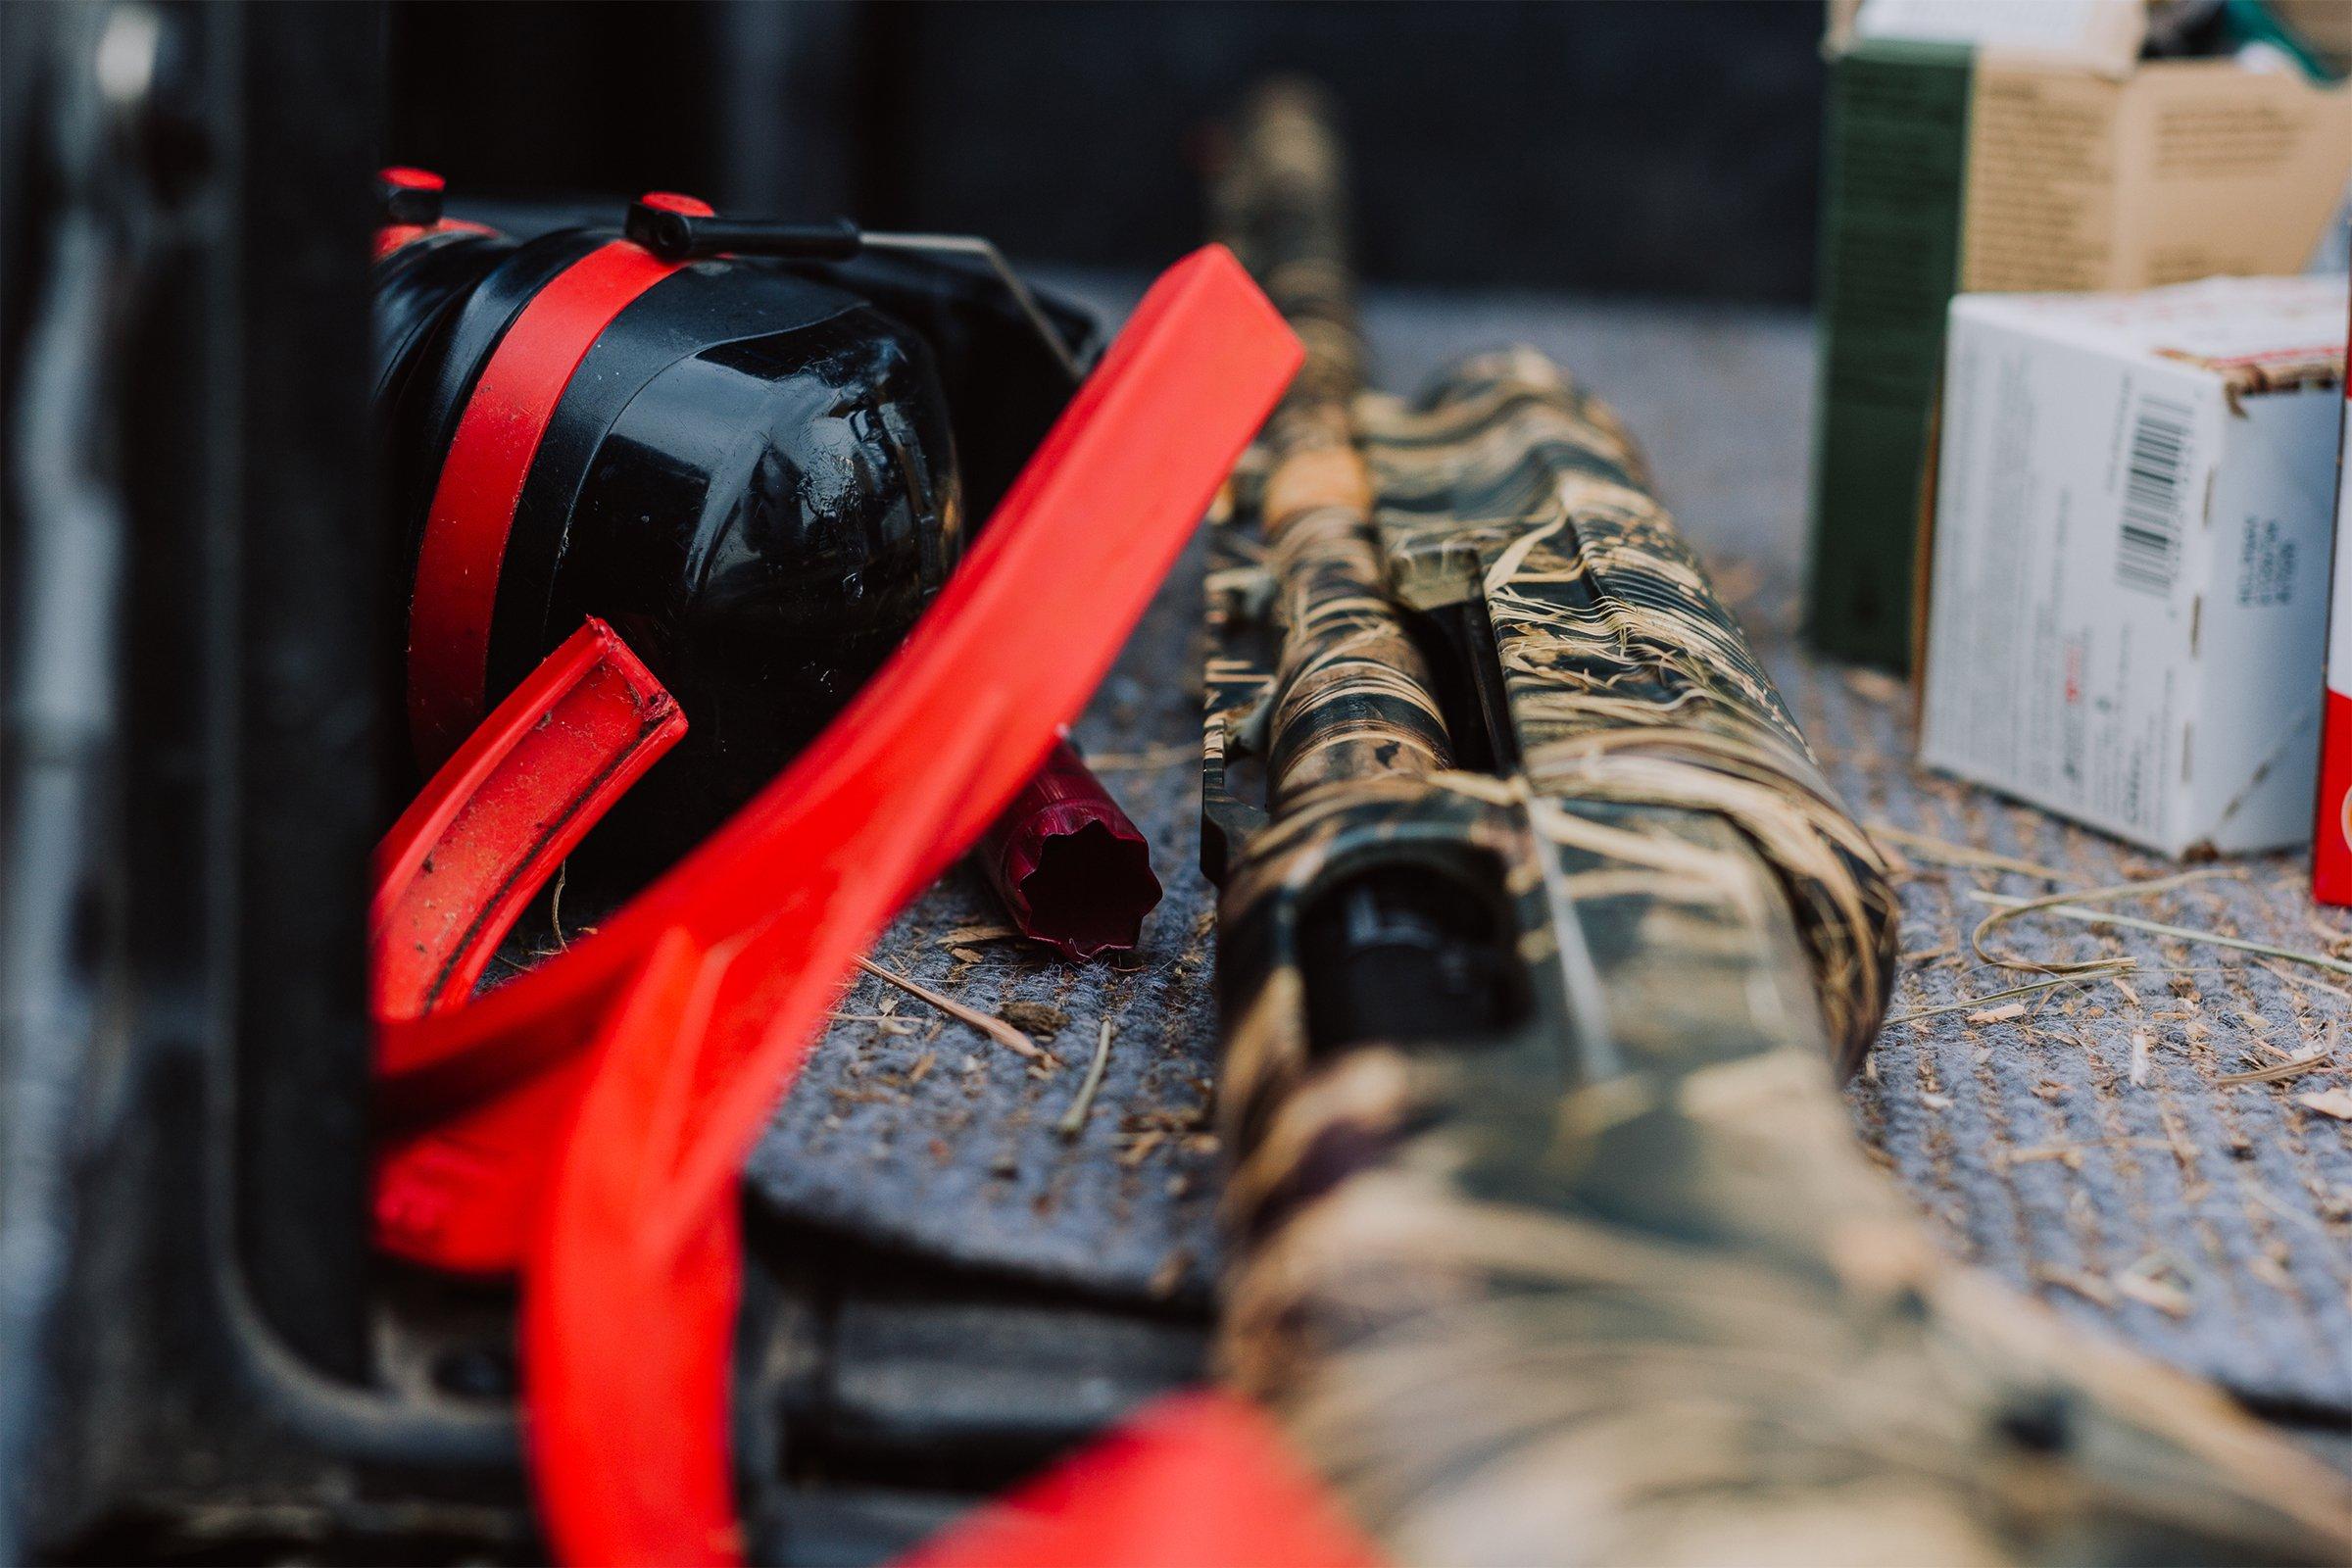 Haven't shot much before duck season? Don't panic. Focus on specific targets at the clays range to fine-tune your wing-shooting. Photo © Kasey Titchener/Shutterstock